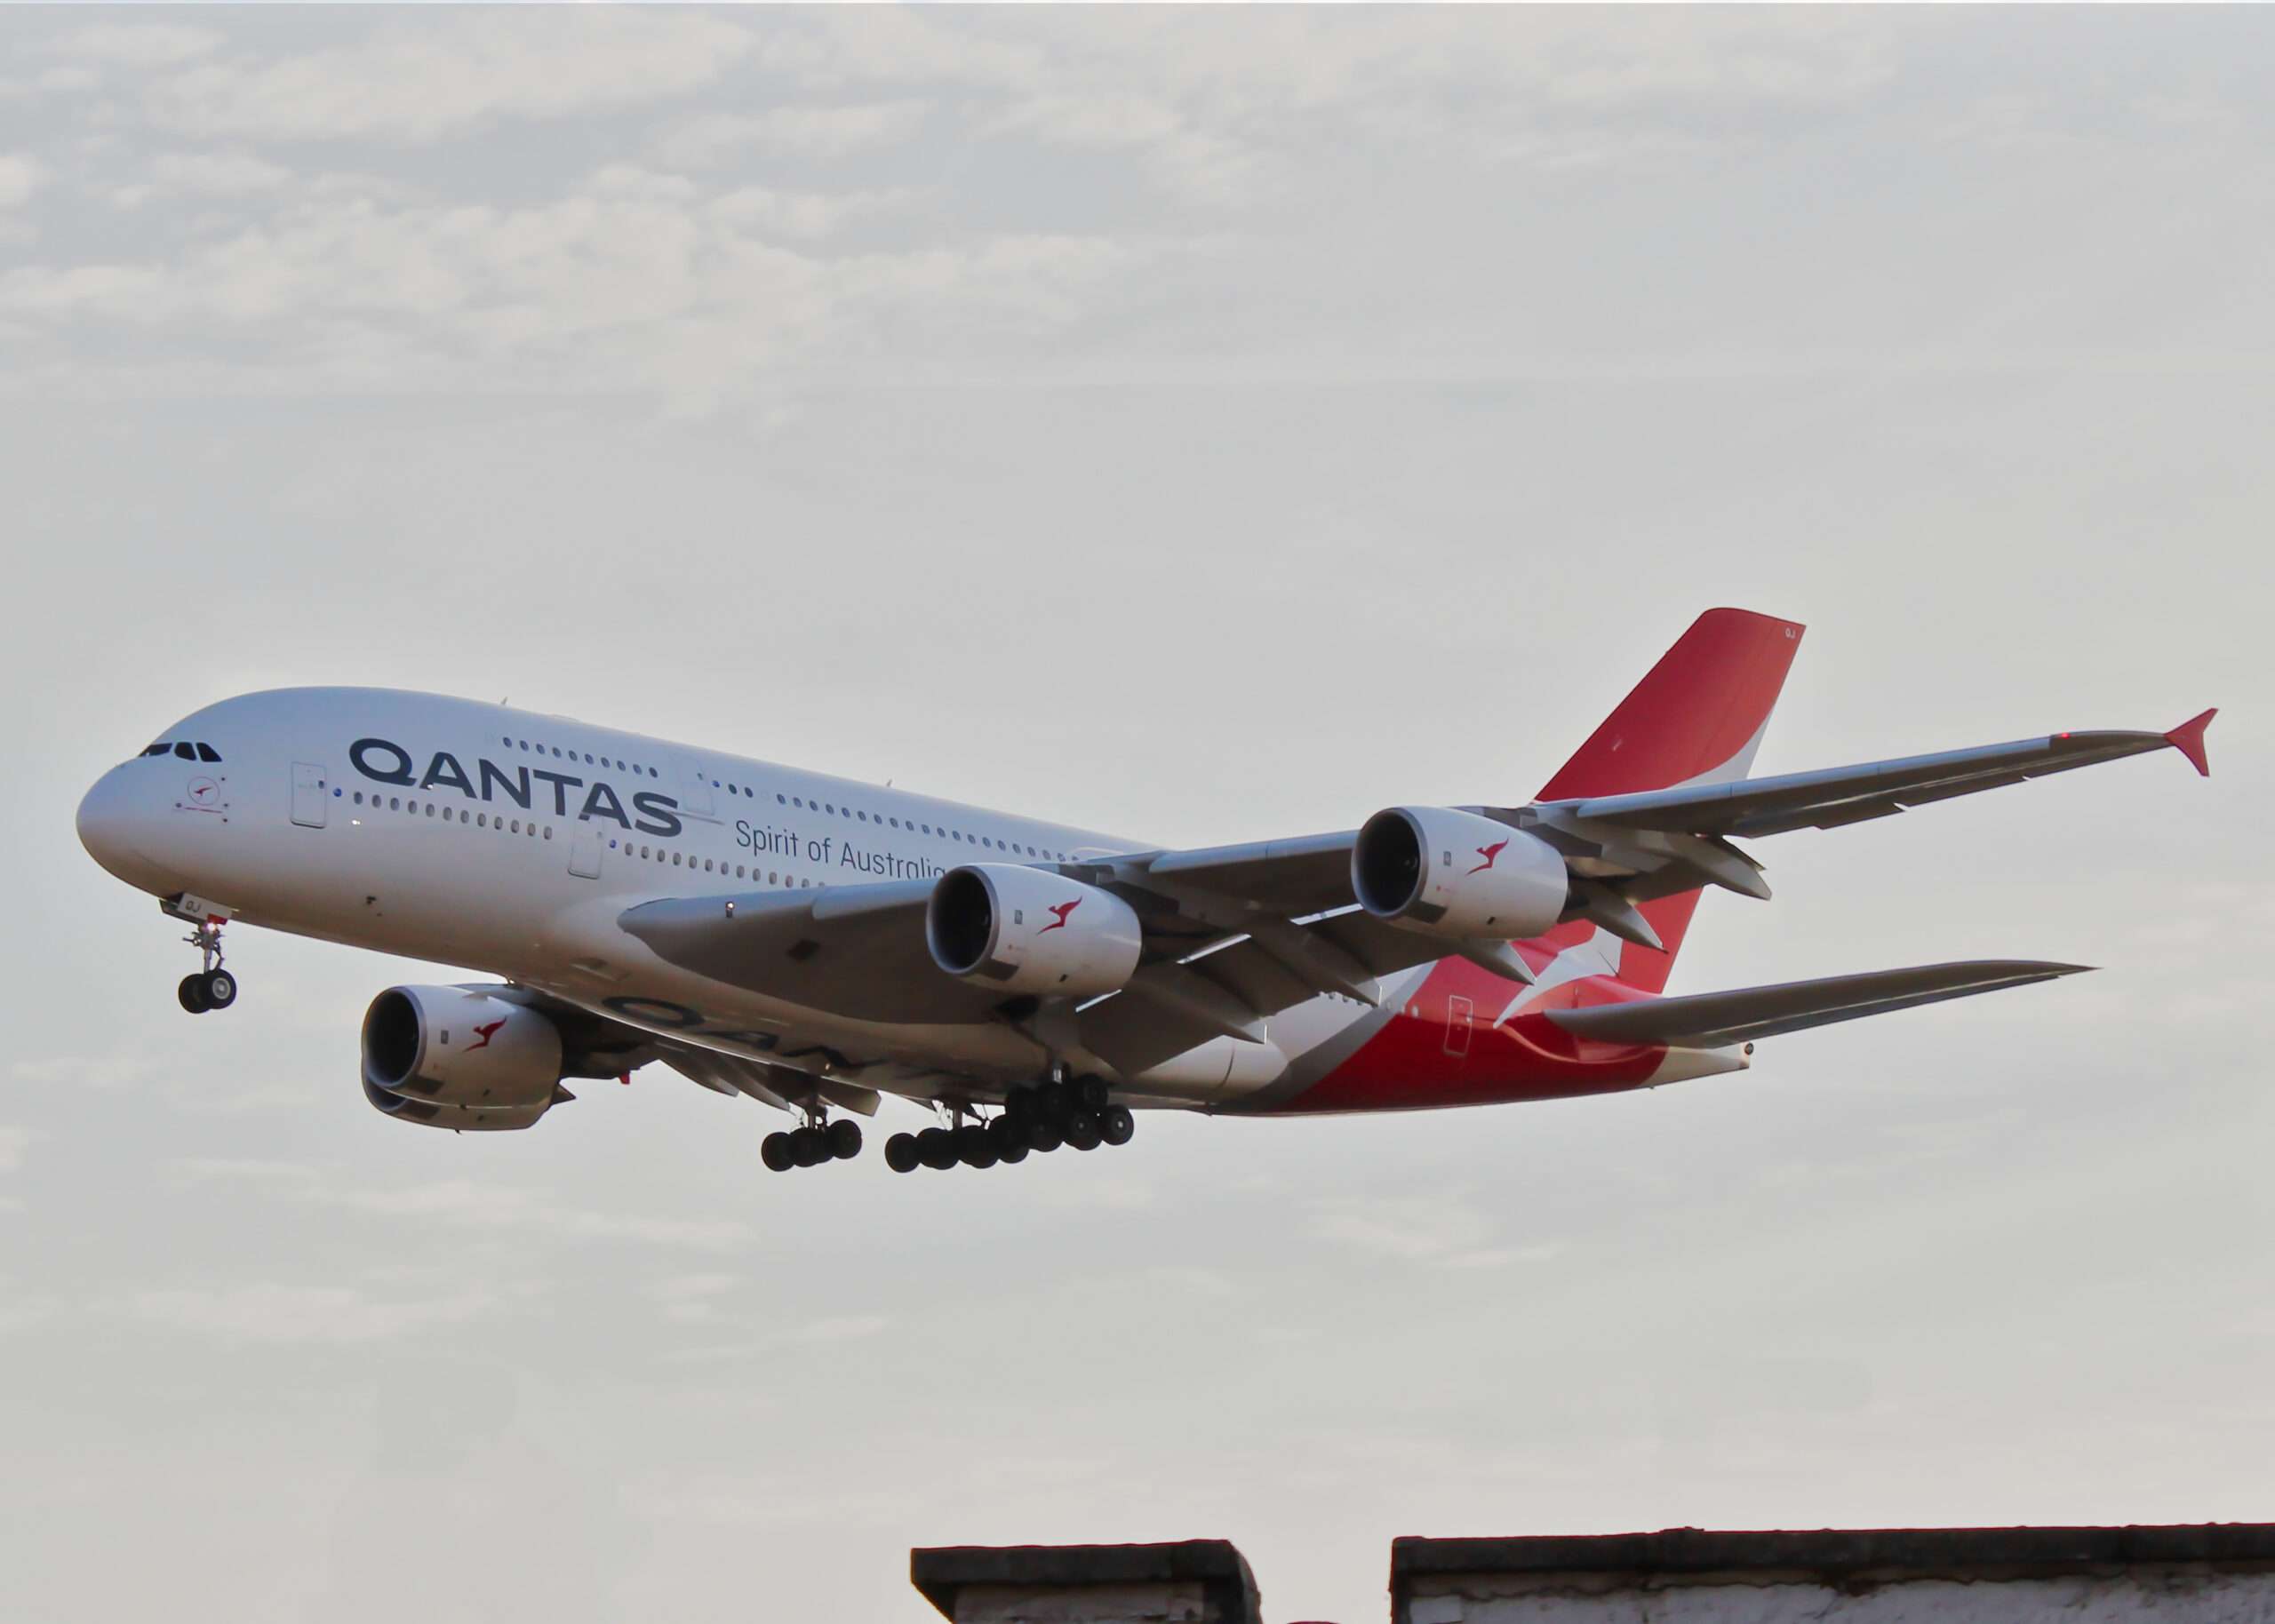 Captain Richard de Crespigny, famously known for the QF32 uncontained engine failure and his positive efforts in that, has put his hat in the ring to join the board at Qantas.